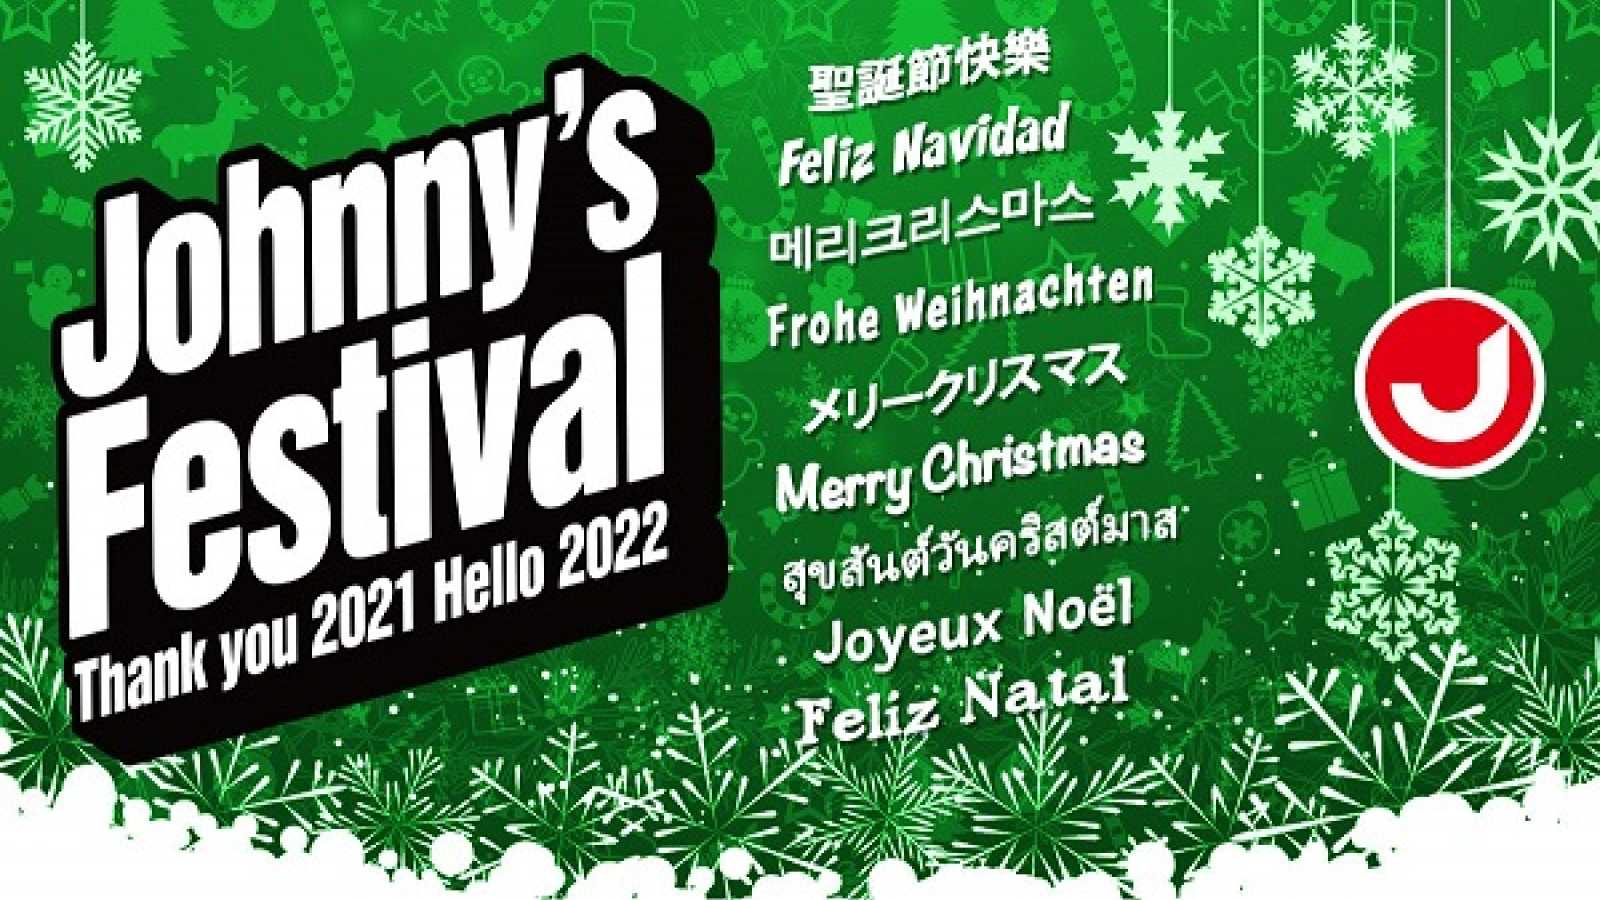 "Johnny’s Festival ‾ Thank you 2021 Hello 2022" to Be Available for On-Demand Viewing Worldwide © Johnny & Associates. All rights reserved.